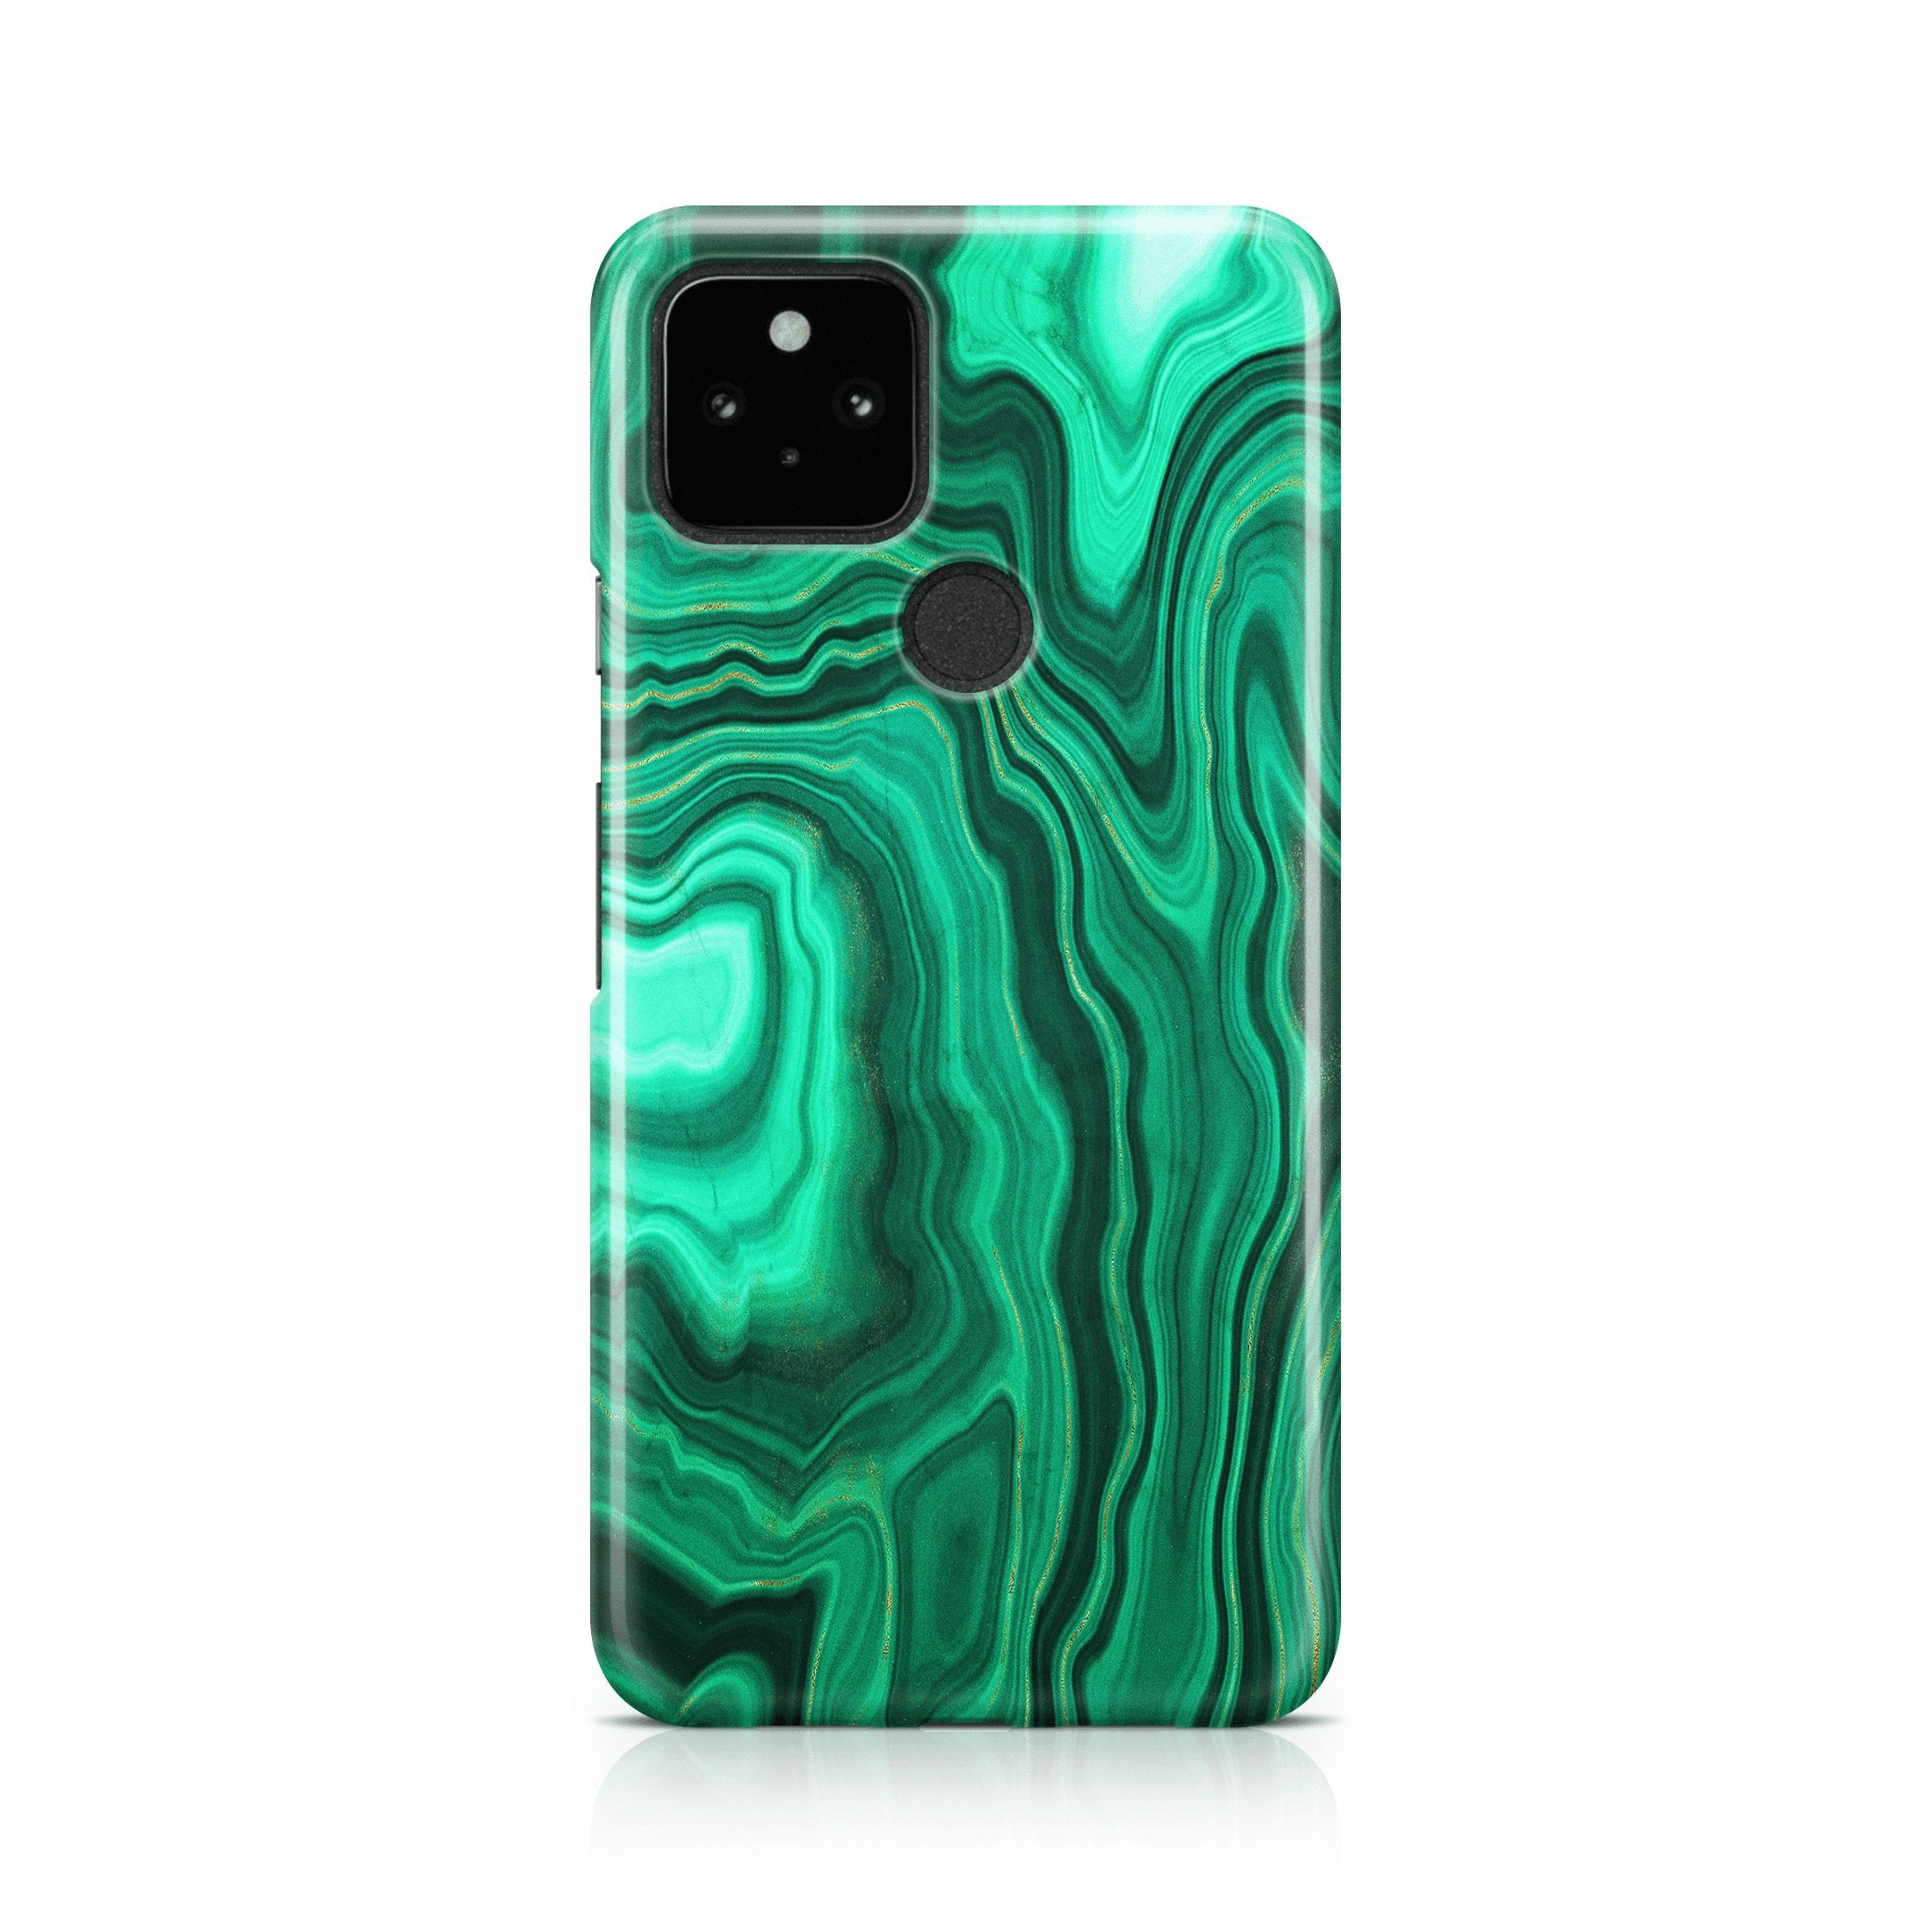 Malachite I - Google phone case designs by CaseSwagger